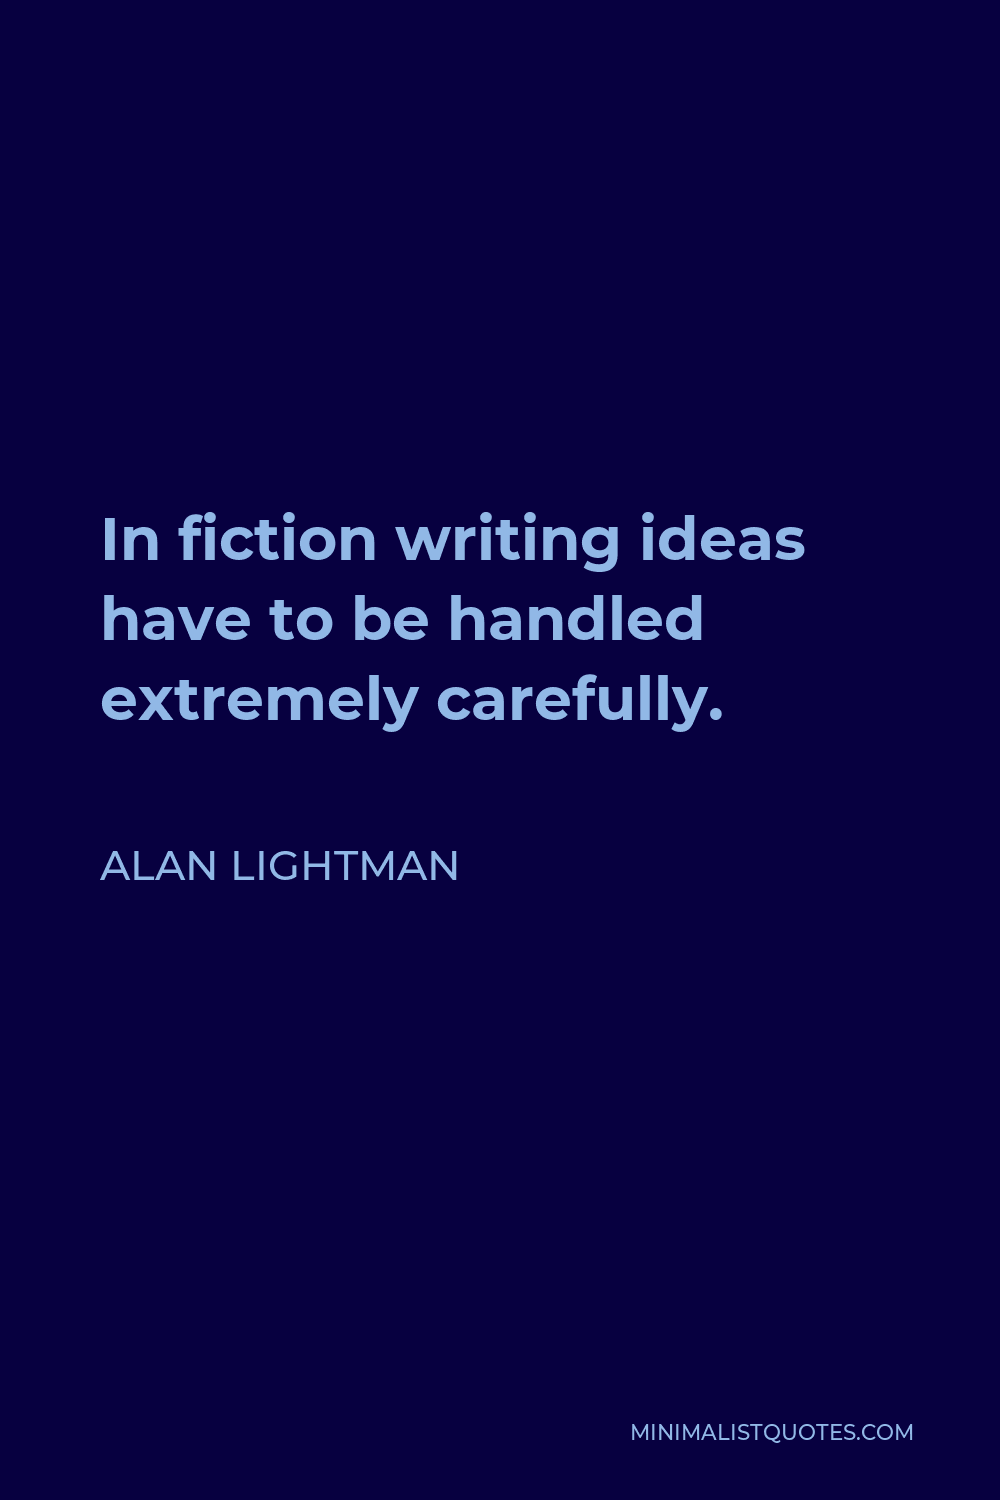 Alan Lightman Quote - In fiction writing ideas have to be handled extremely carefully.